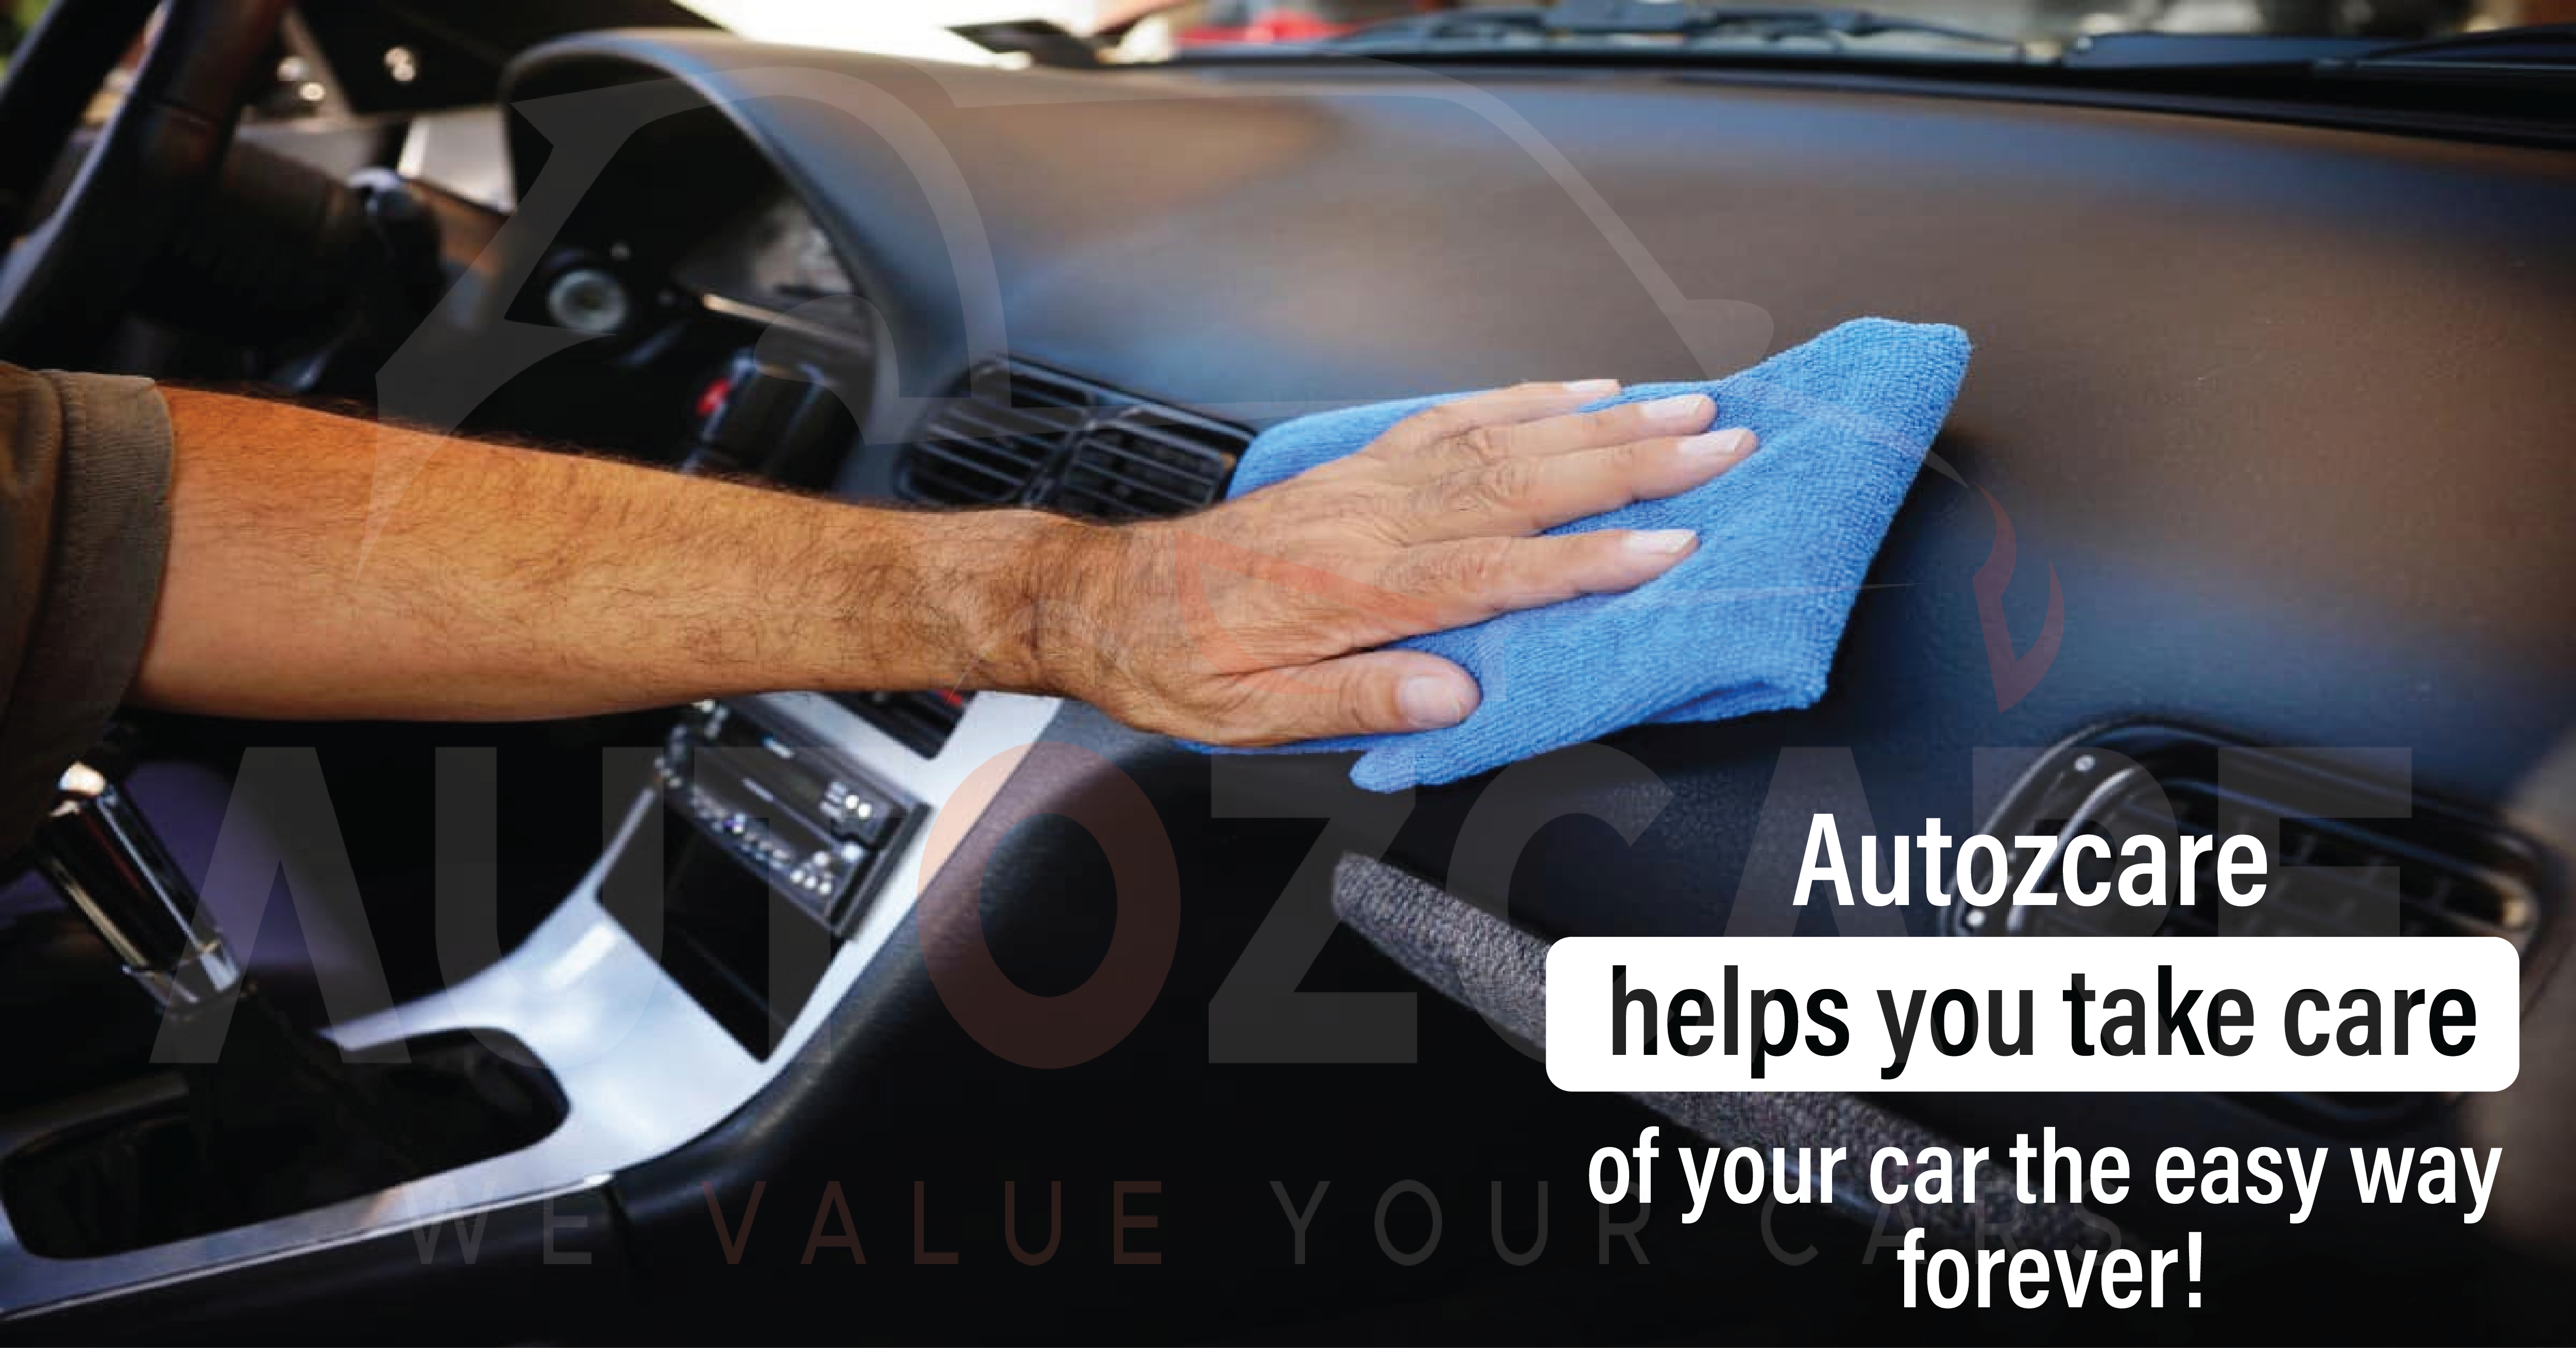 AutozCare helps you take care of your car the easy way forever!